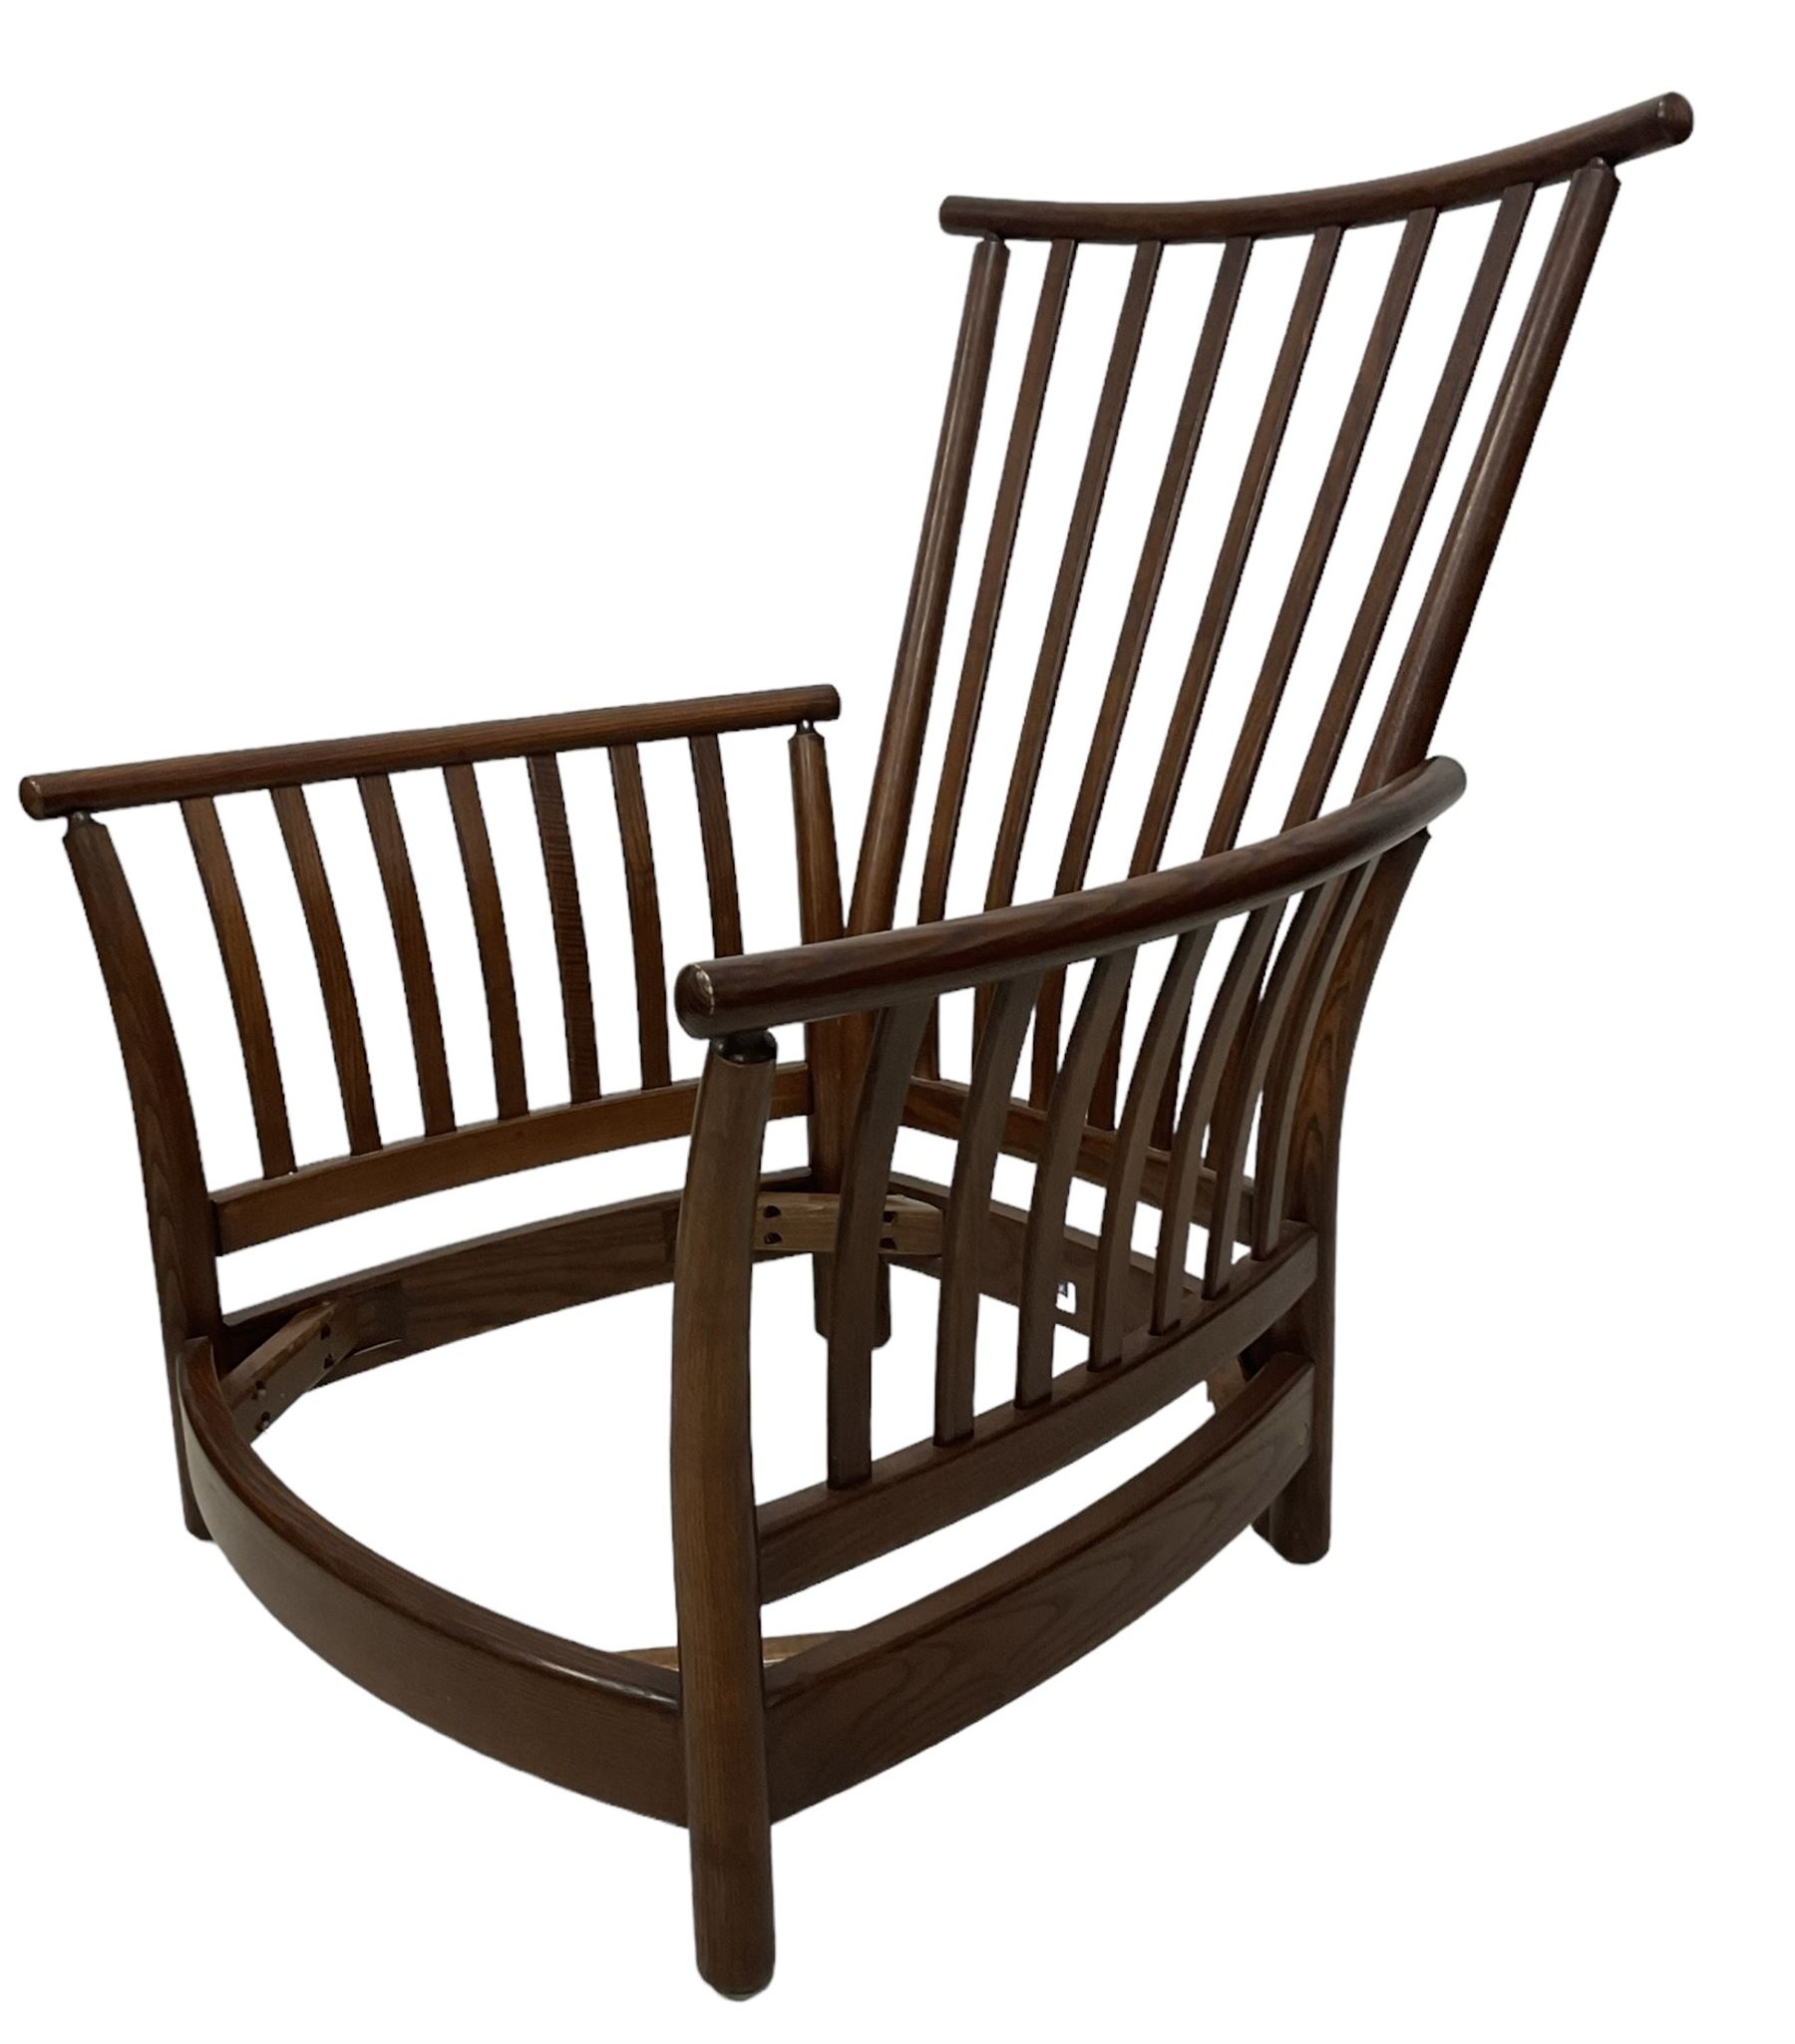 Ercol - mid-20th century elm and beech 'Renaissance' armchair - Image 12 of 14